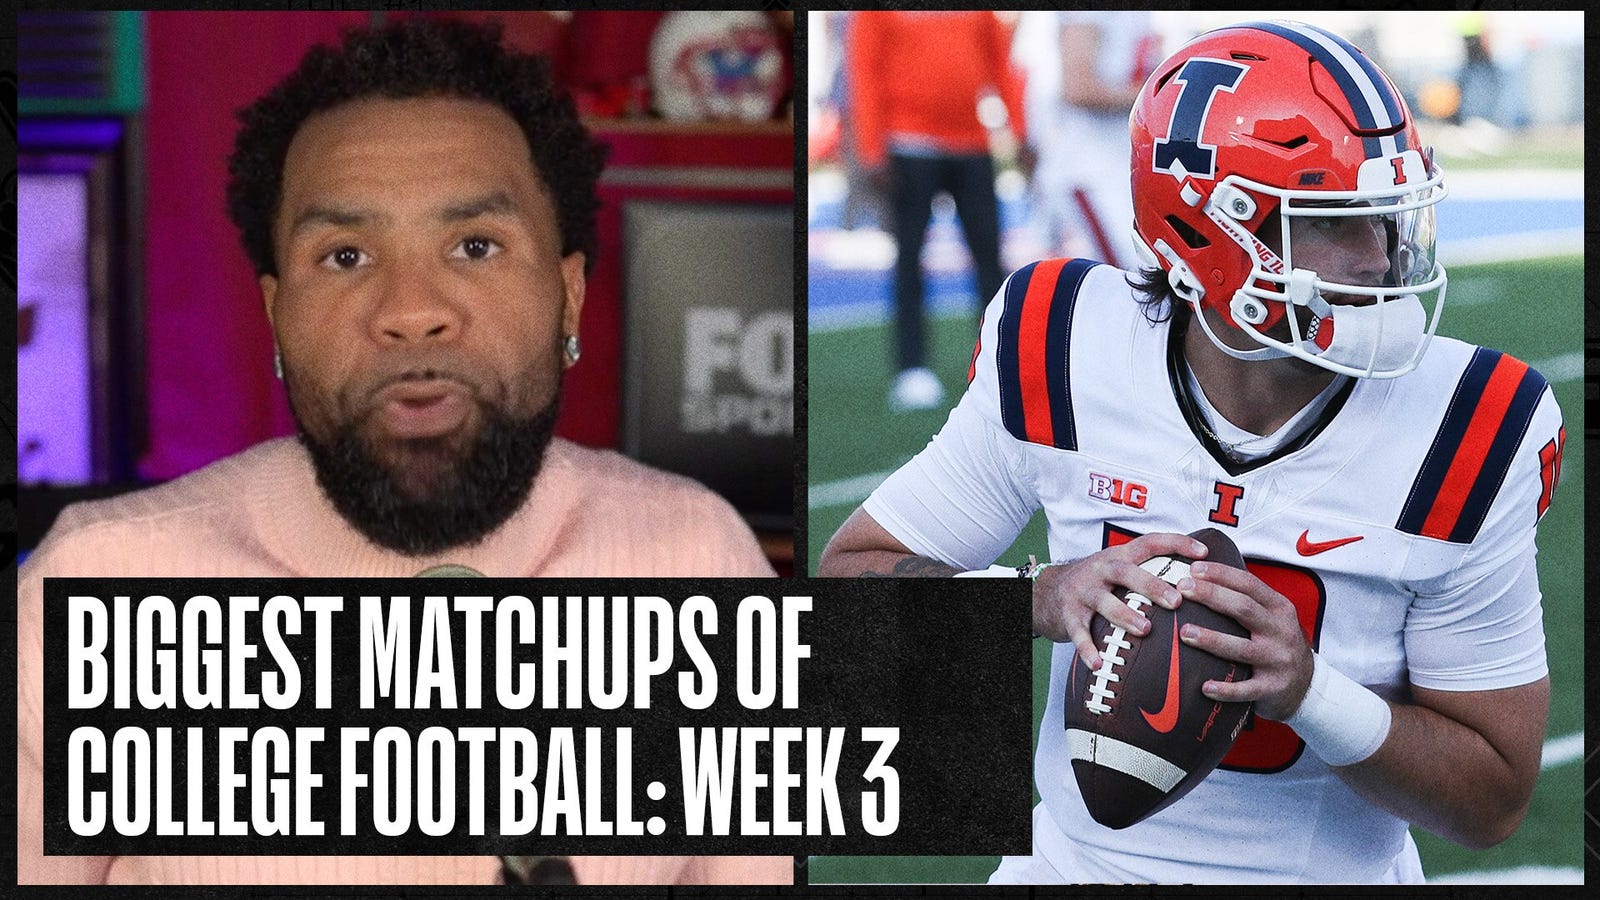 Week 3 preview: Can Illinois upset Penn State?